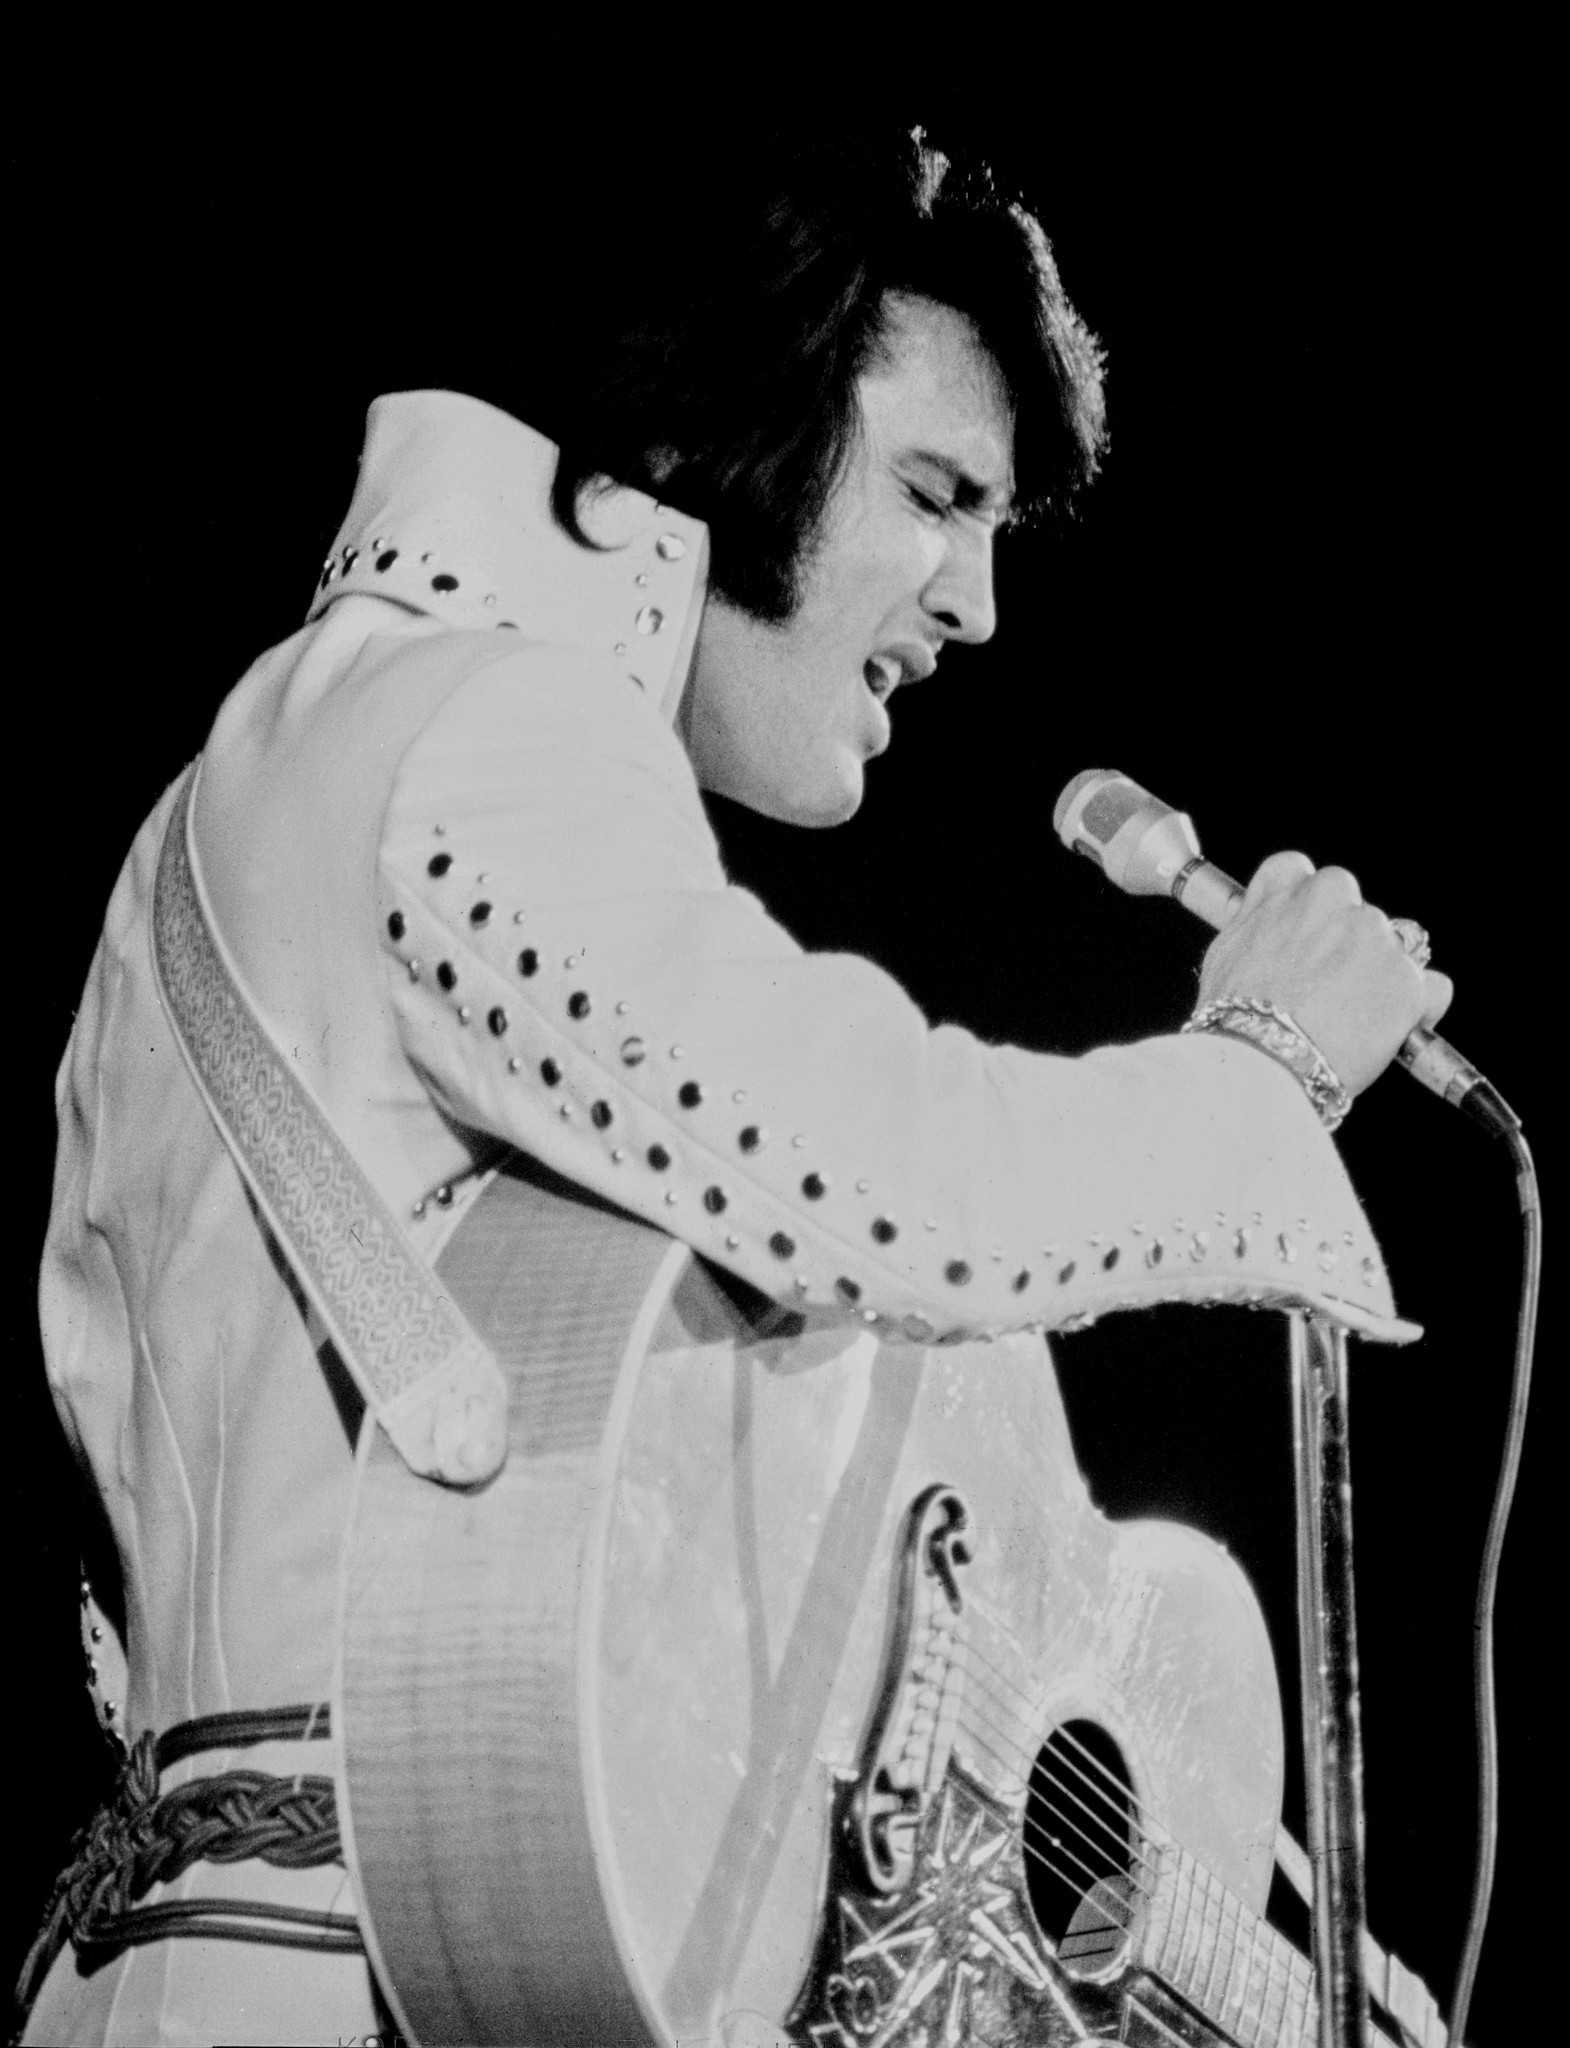 During the 1970s. Elvis was famous for his jewel-encrusted jumpsuits. He's seen here performing at the International on Aug. 17, 1971.